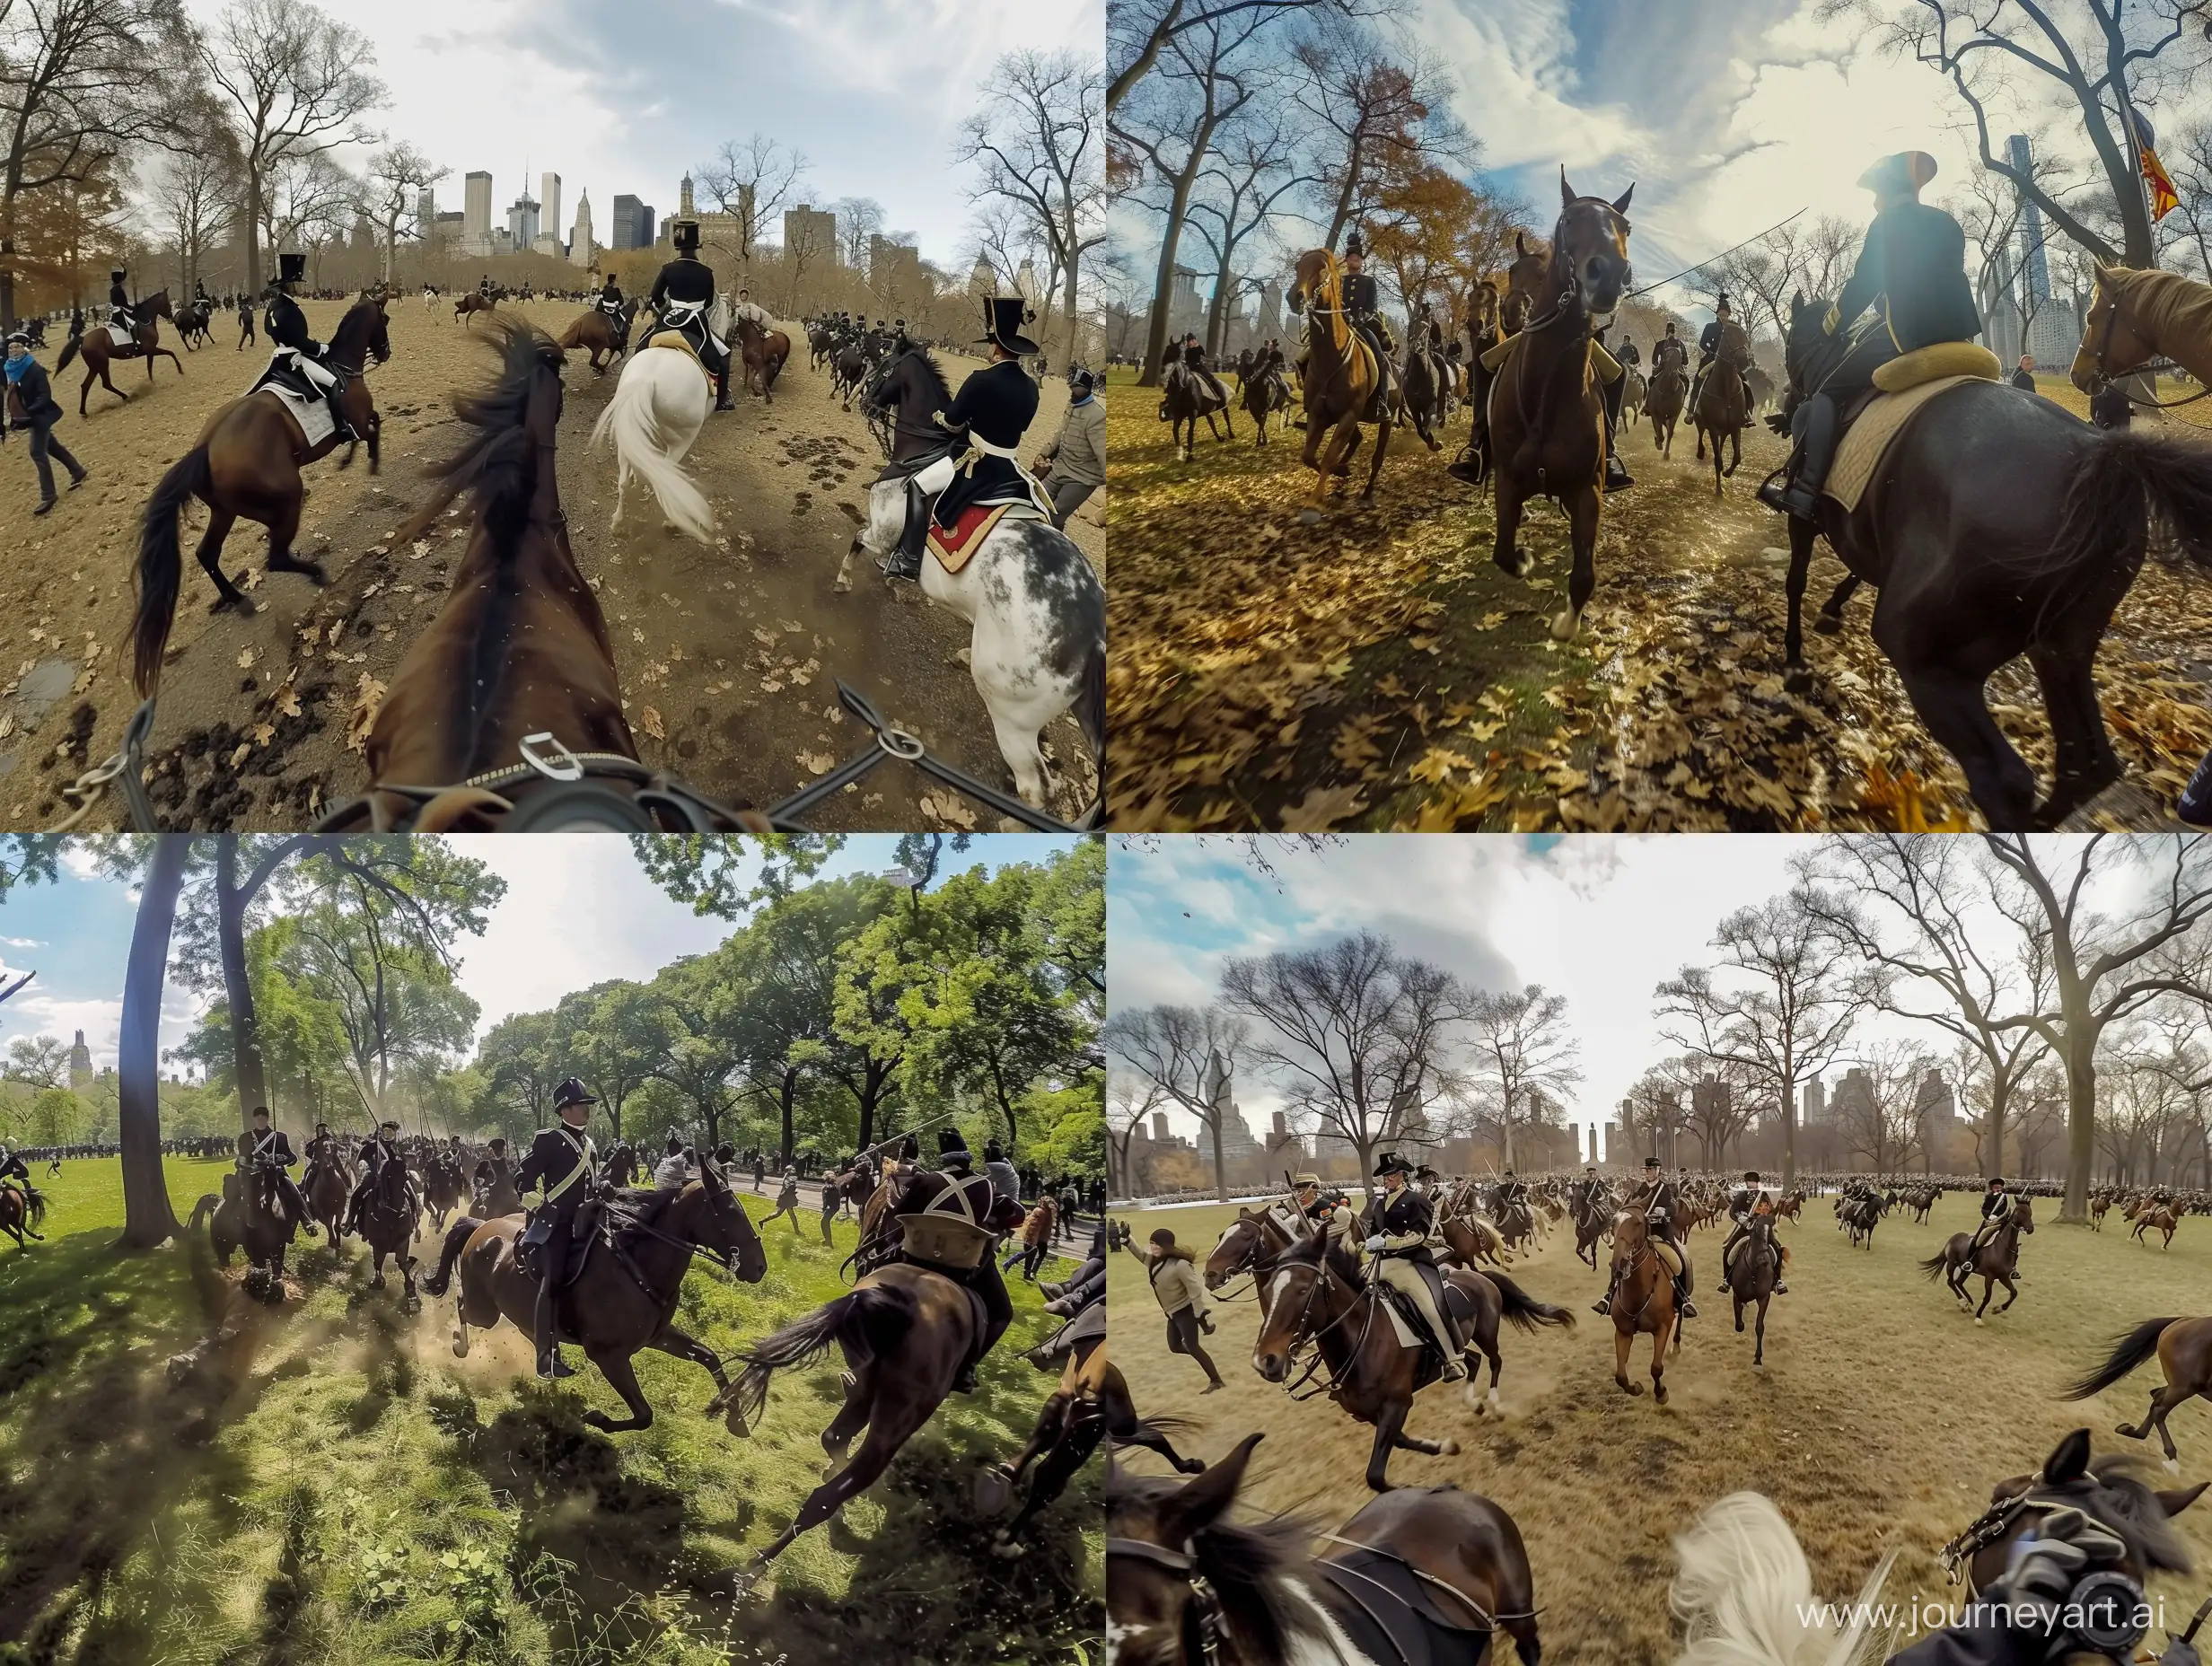 gopro footage of napoleonic cavalry storming through central park on horseback, pov, civillians running away in fear, horses running